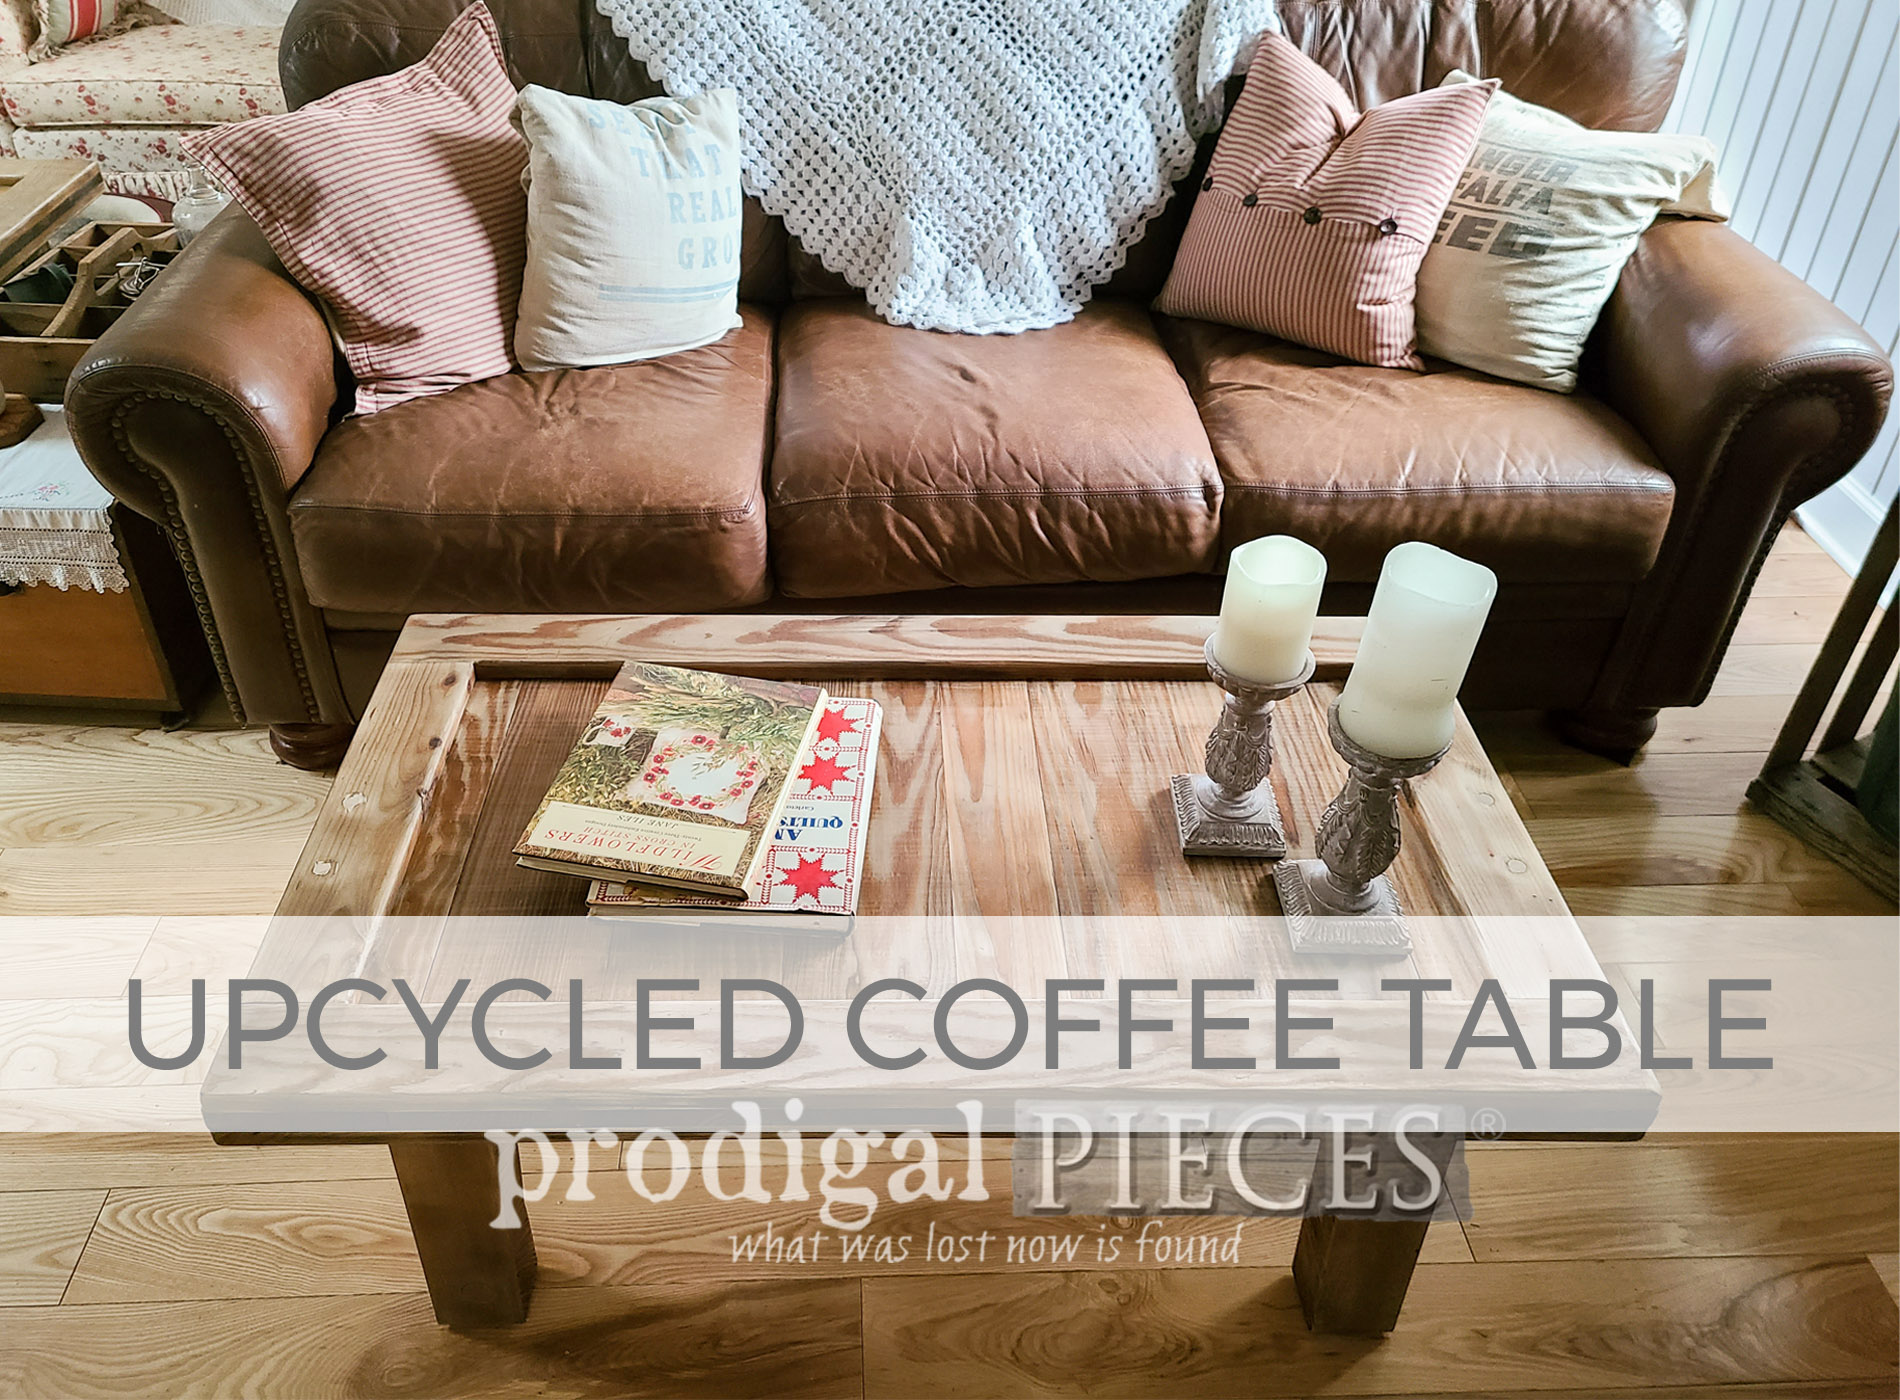 Upcycled Coffee Table by Larissa of Prodigal Pieces | shop.prodigalpieces.com #prodigalpieces